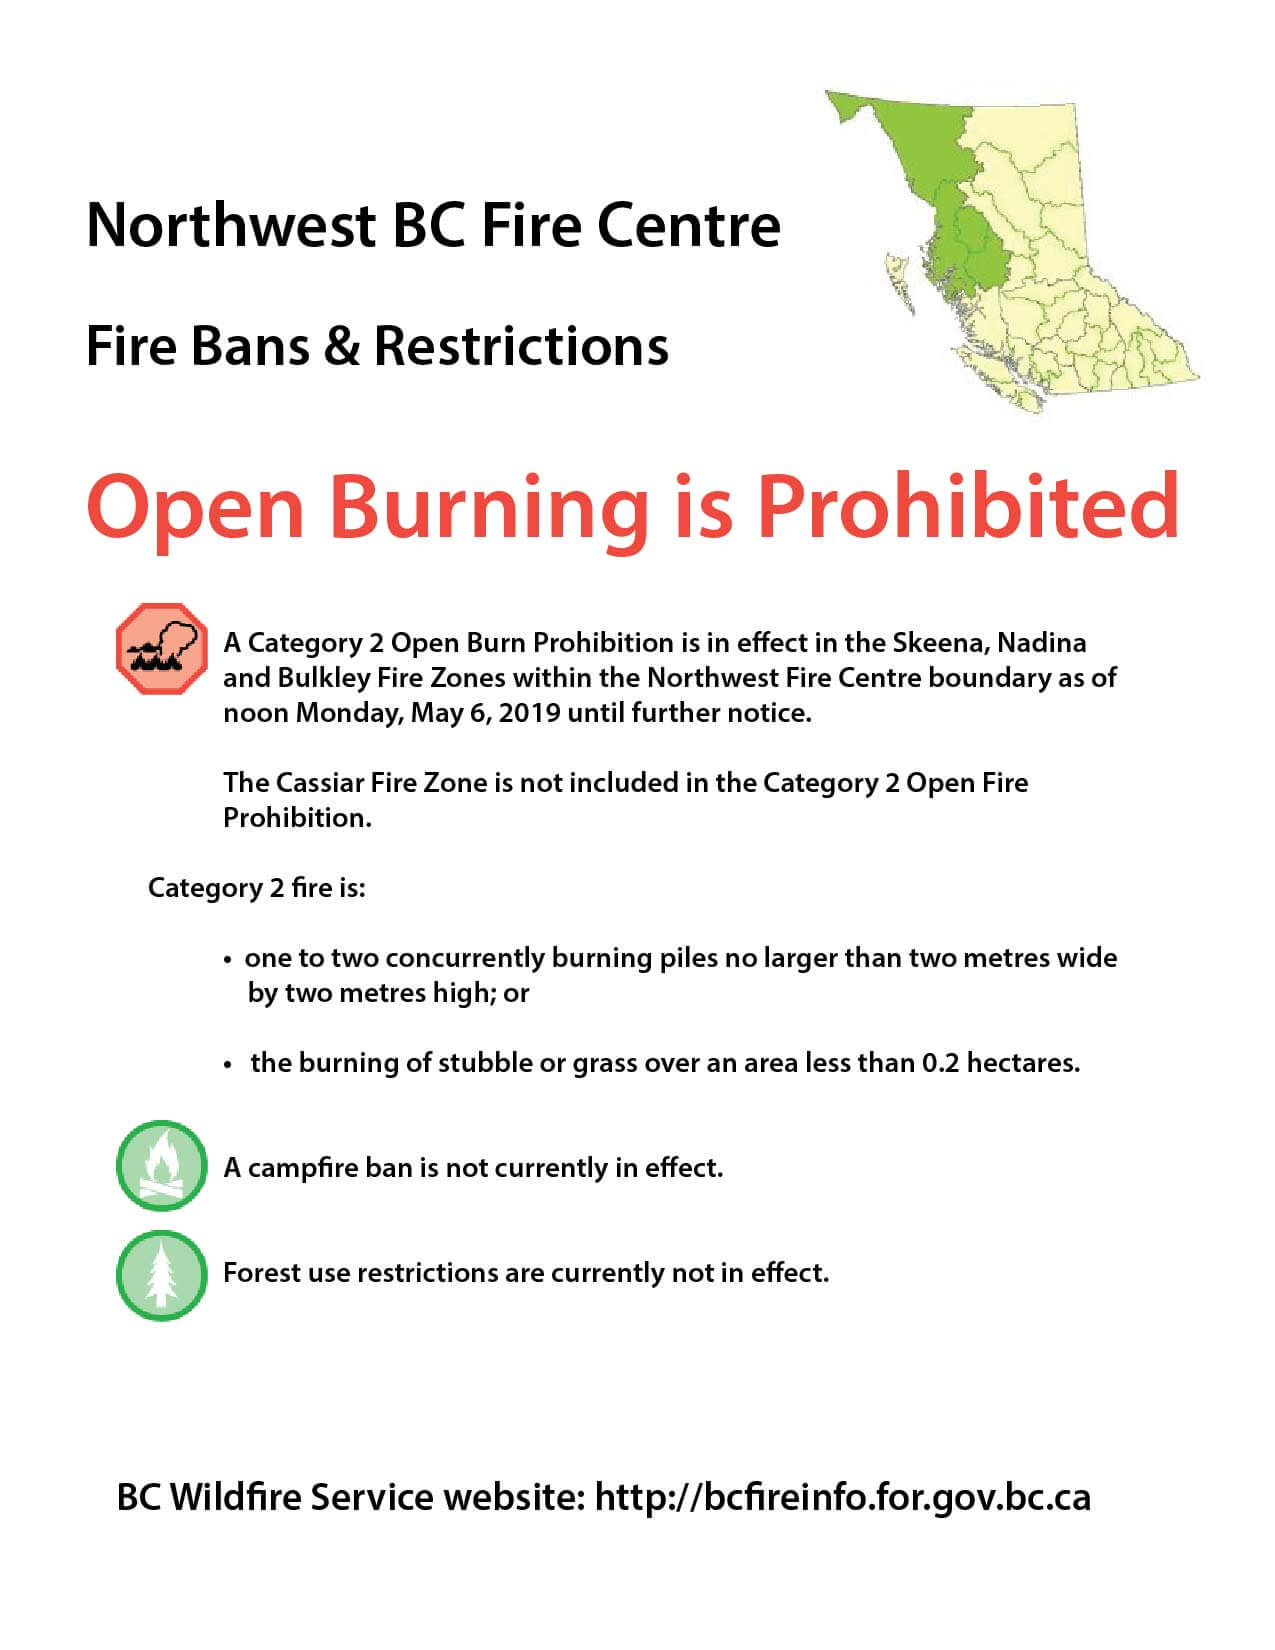 Category 2 Open Burn Prohibition in Effect in Northwest Fire Centre